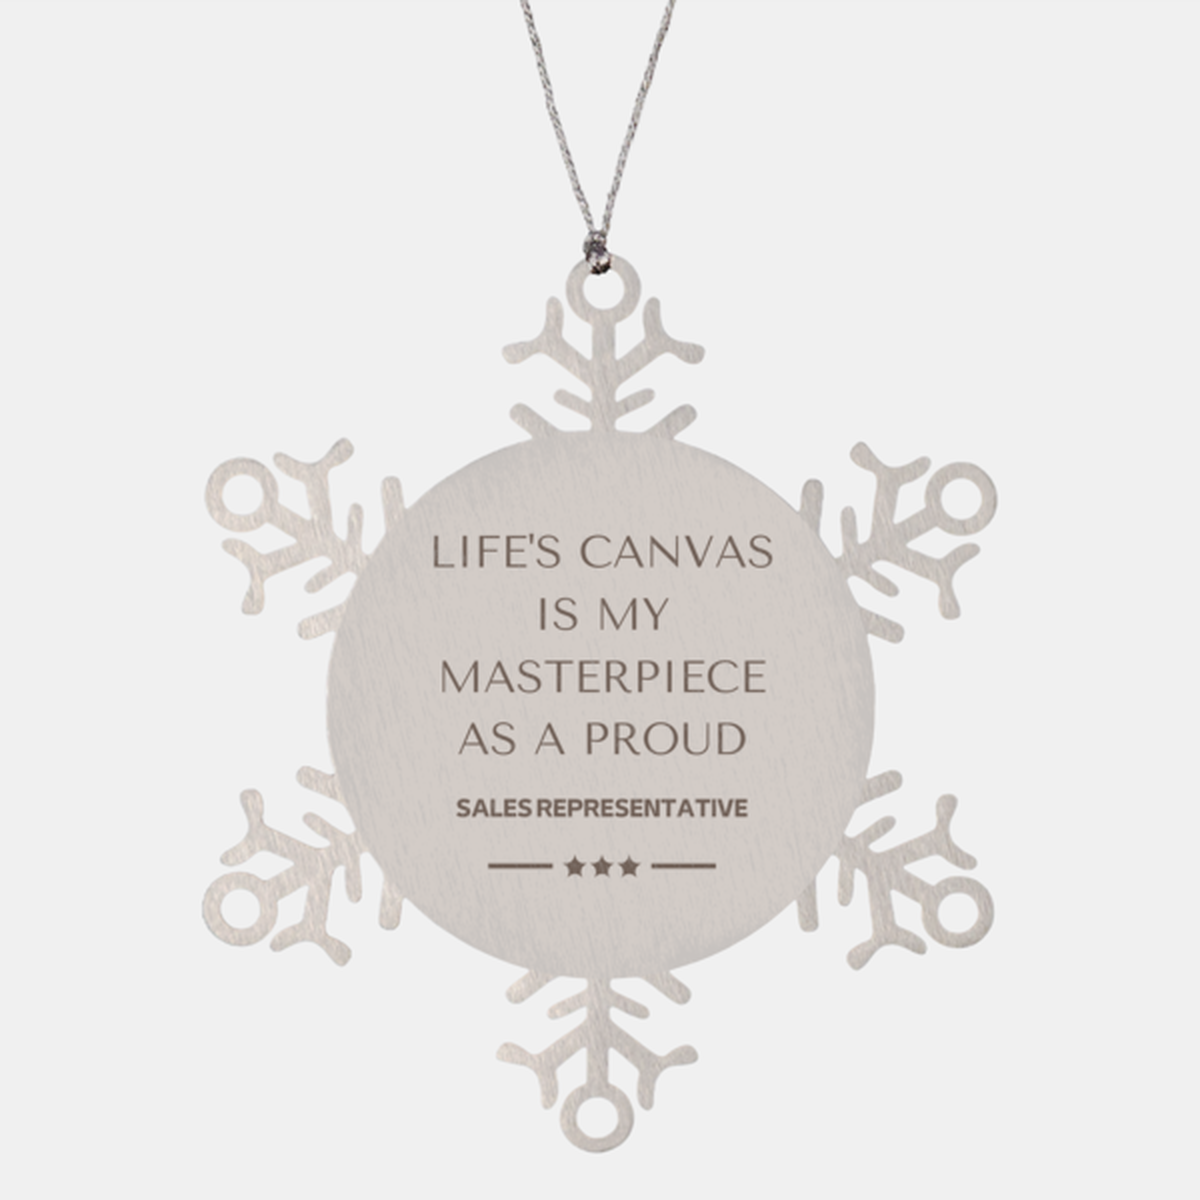 Proud Sales Representative Gifts, Life's canvas is my masterpiece, Epic Birthday Christmas Unique Snowflake Ornament For Sales Representative, Coworkers, Men, Women, Friends